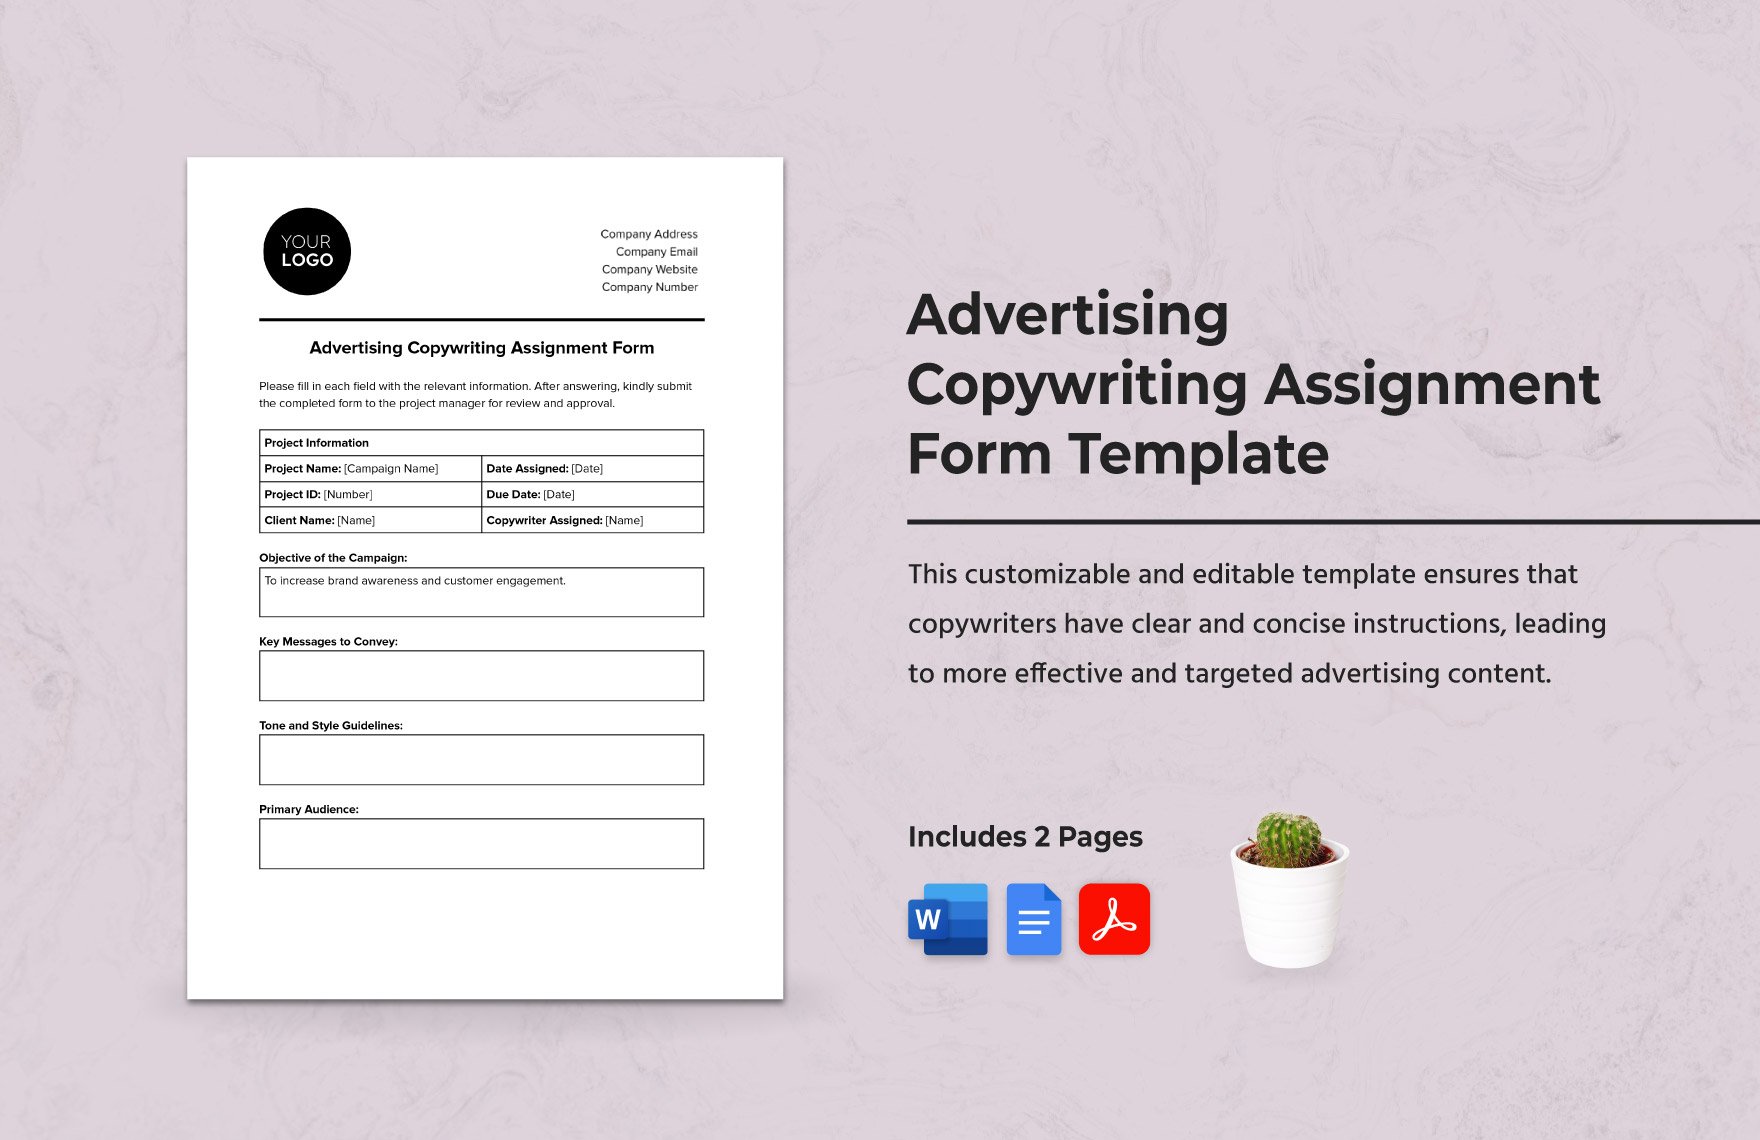 Advertising Copywriting Assignment Form Template in Word, Google Docs, PDF